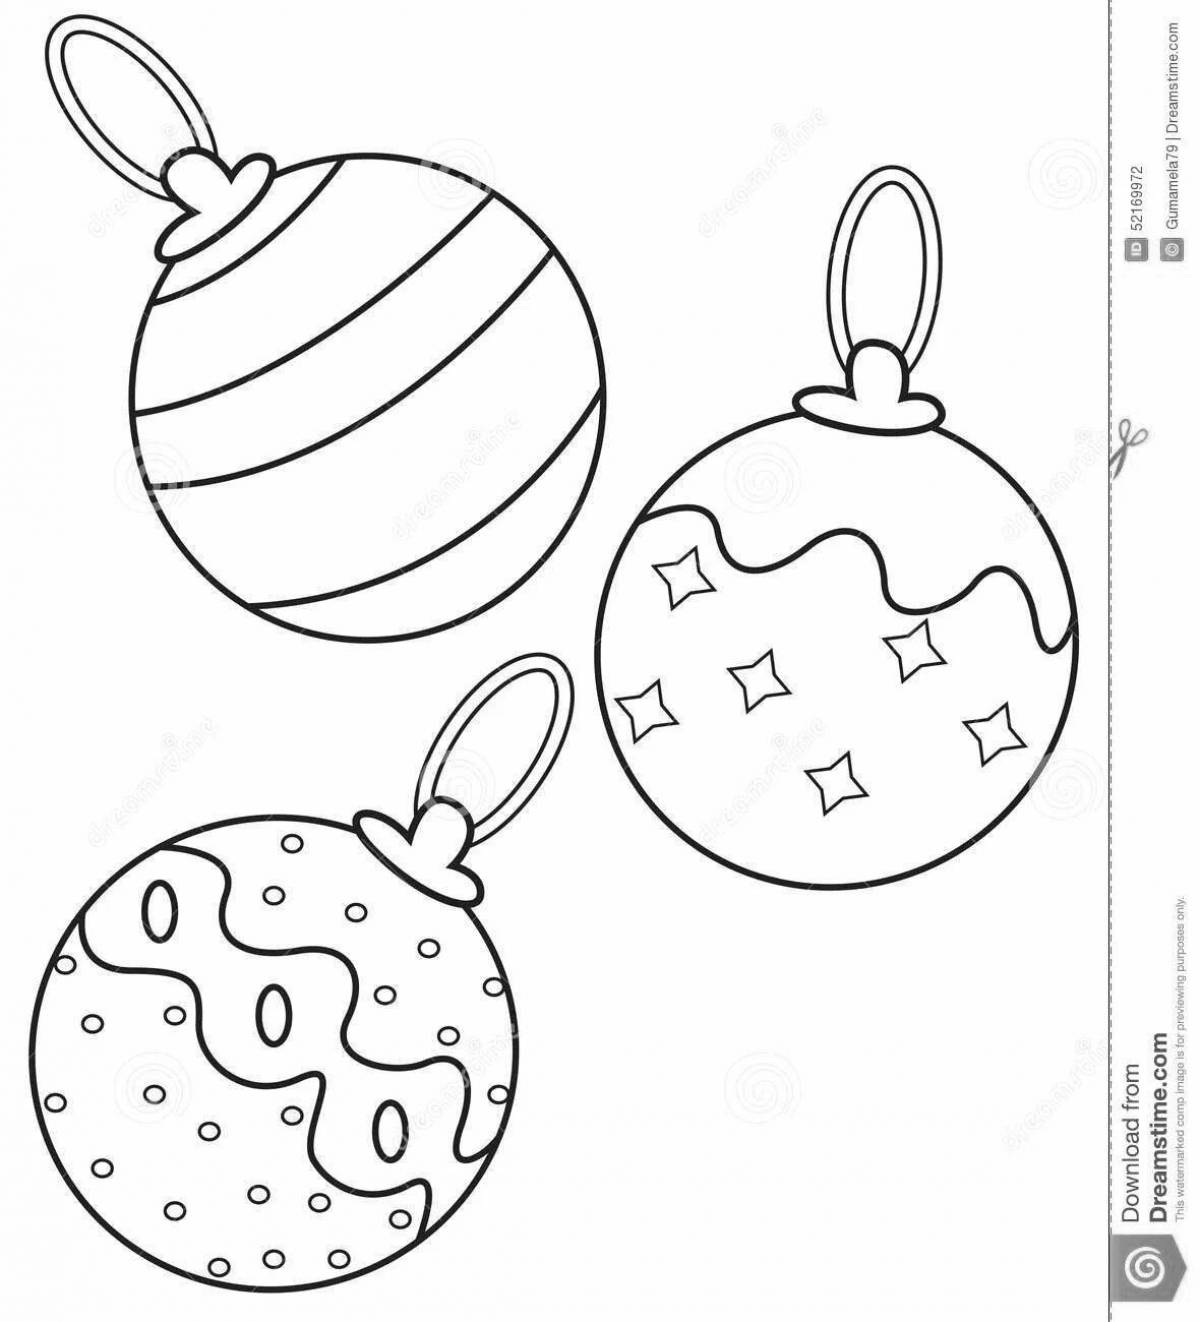 Glowing Christmas toy coloring page